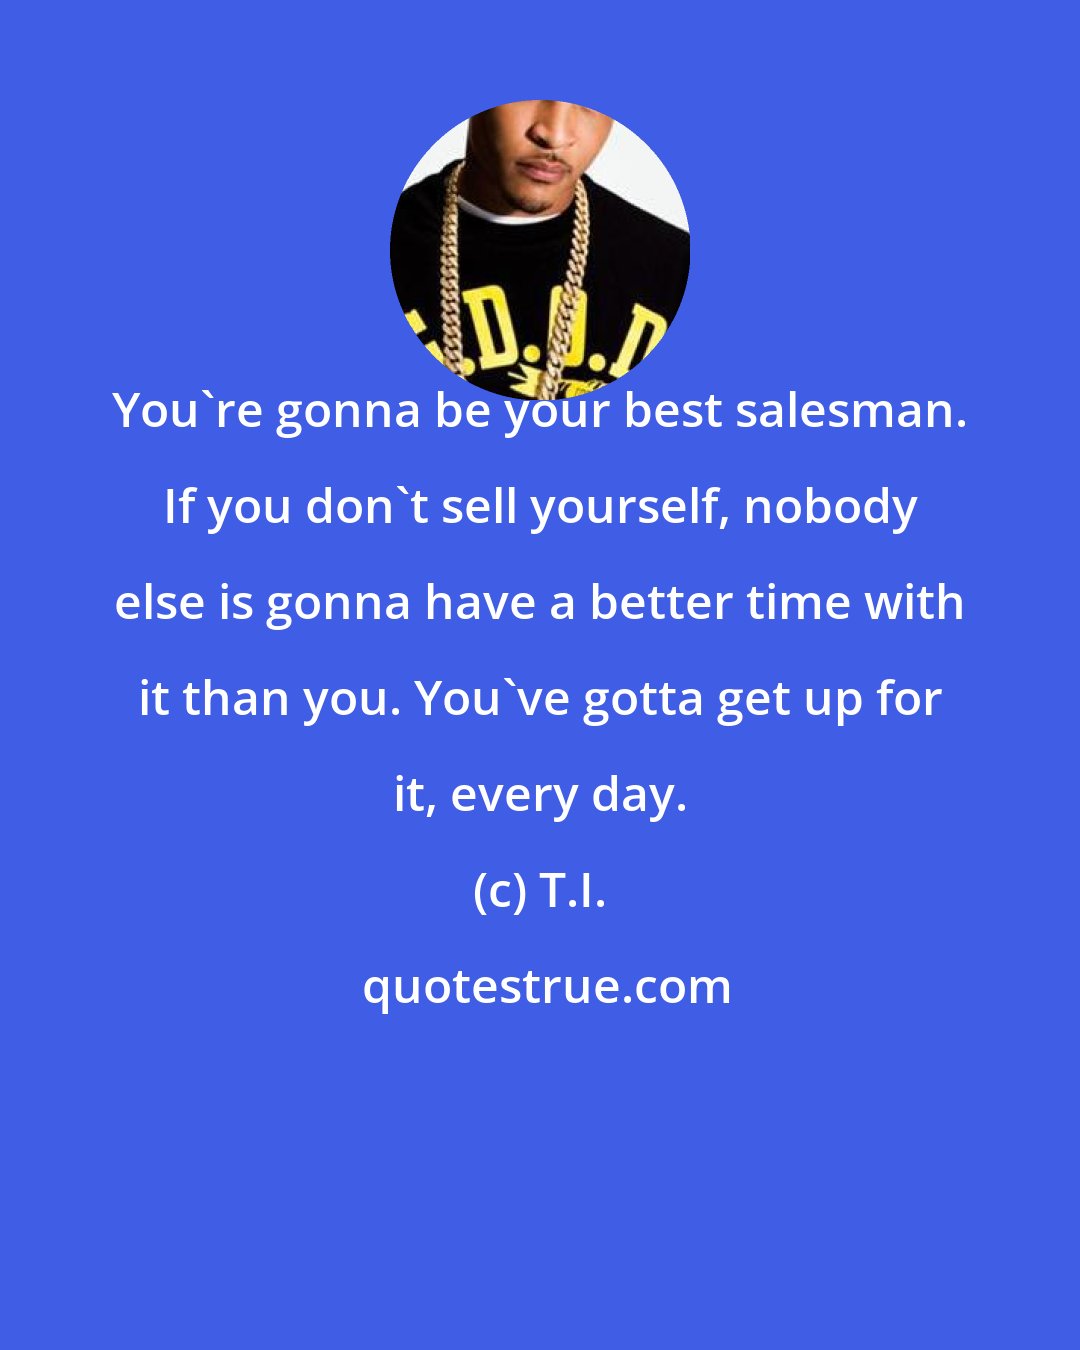 T.I.: You're gonna be your best salesman. If you don't sell yourself, nobody else is gonna have a better time with it than you. You've gotta get up for it, every day.